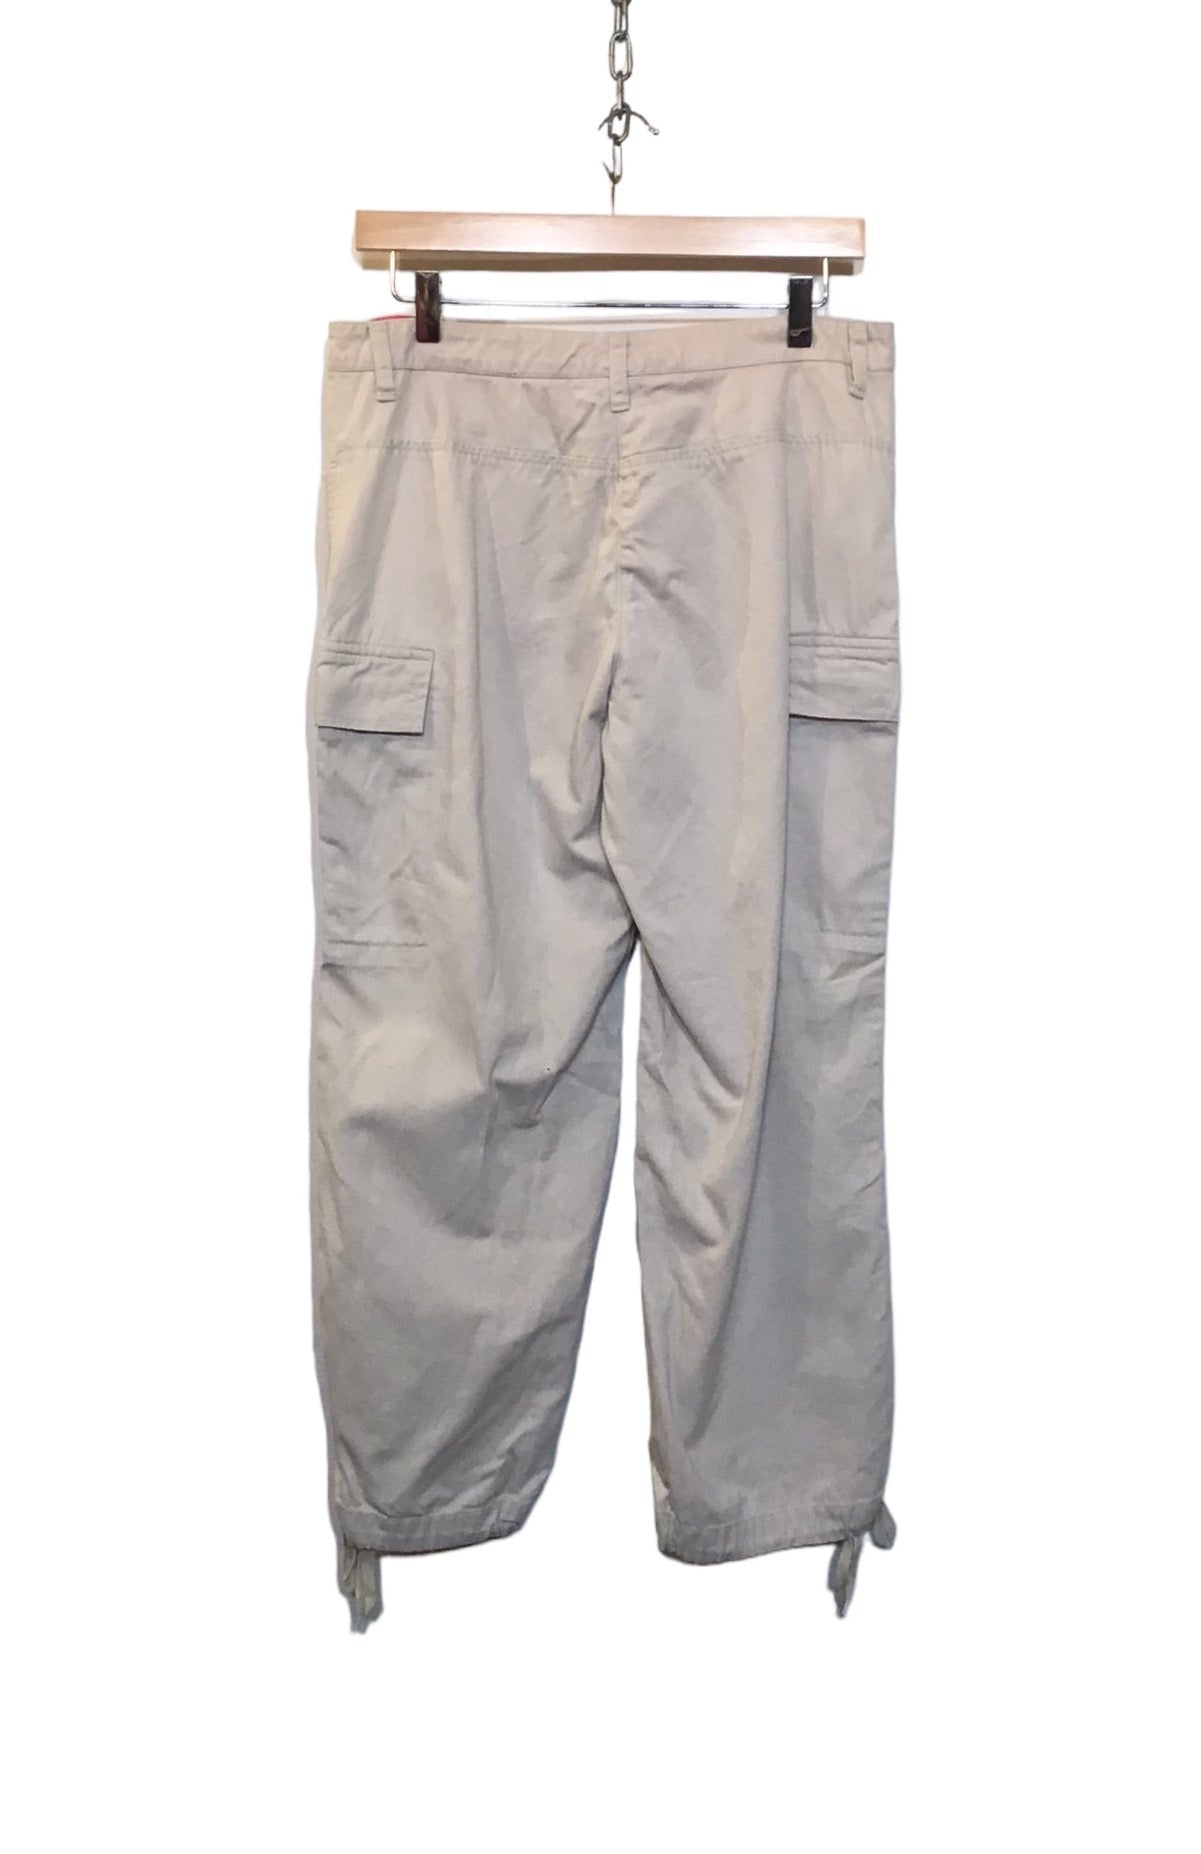 DKNY Trousers (Size S)